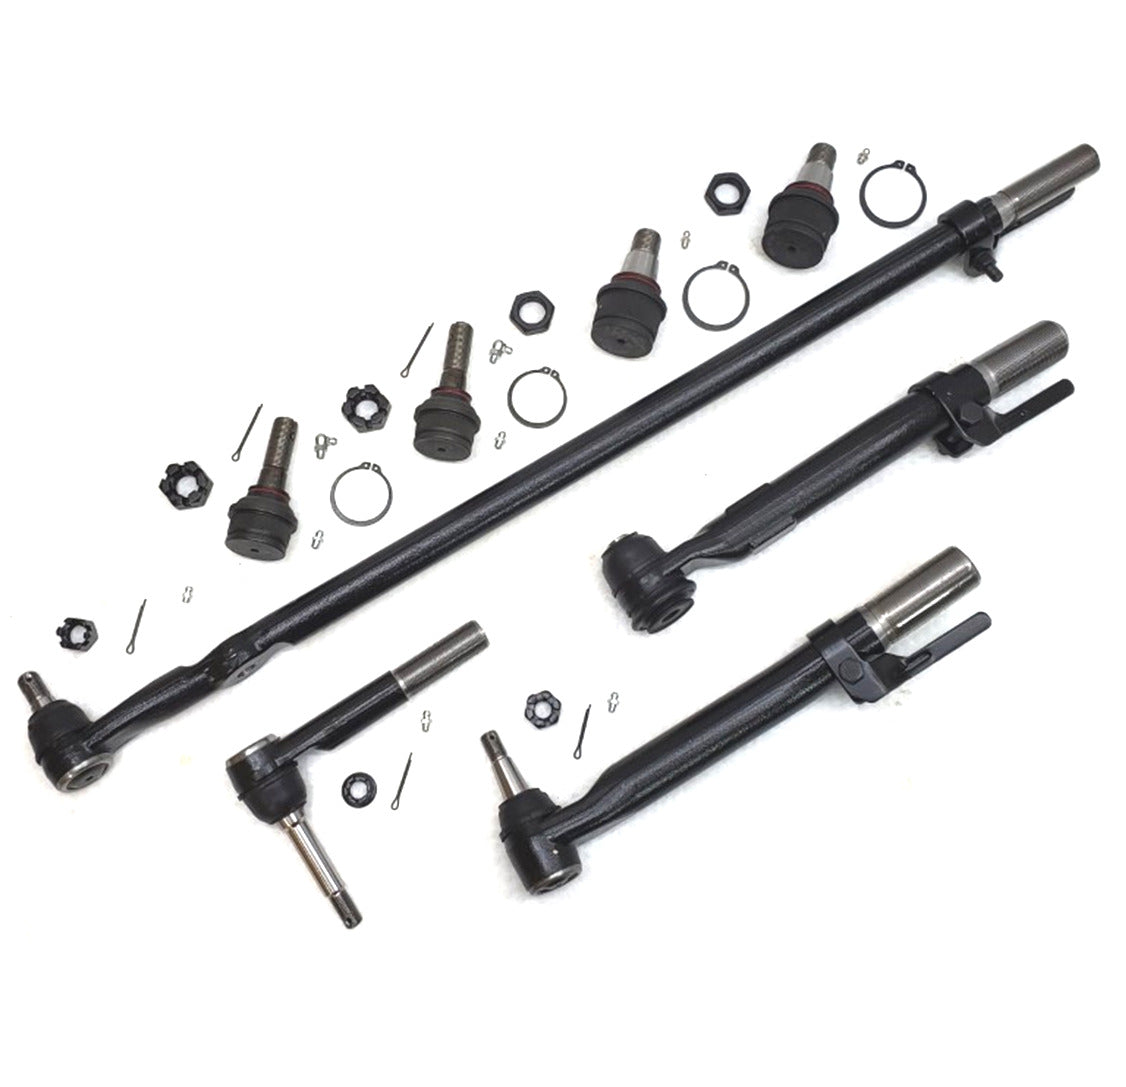 XRF Drag Link Ball Joint Tie Rod Kit for 2005-2010 Ford F450, F550 Super Duty 2WD